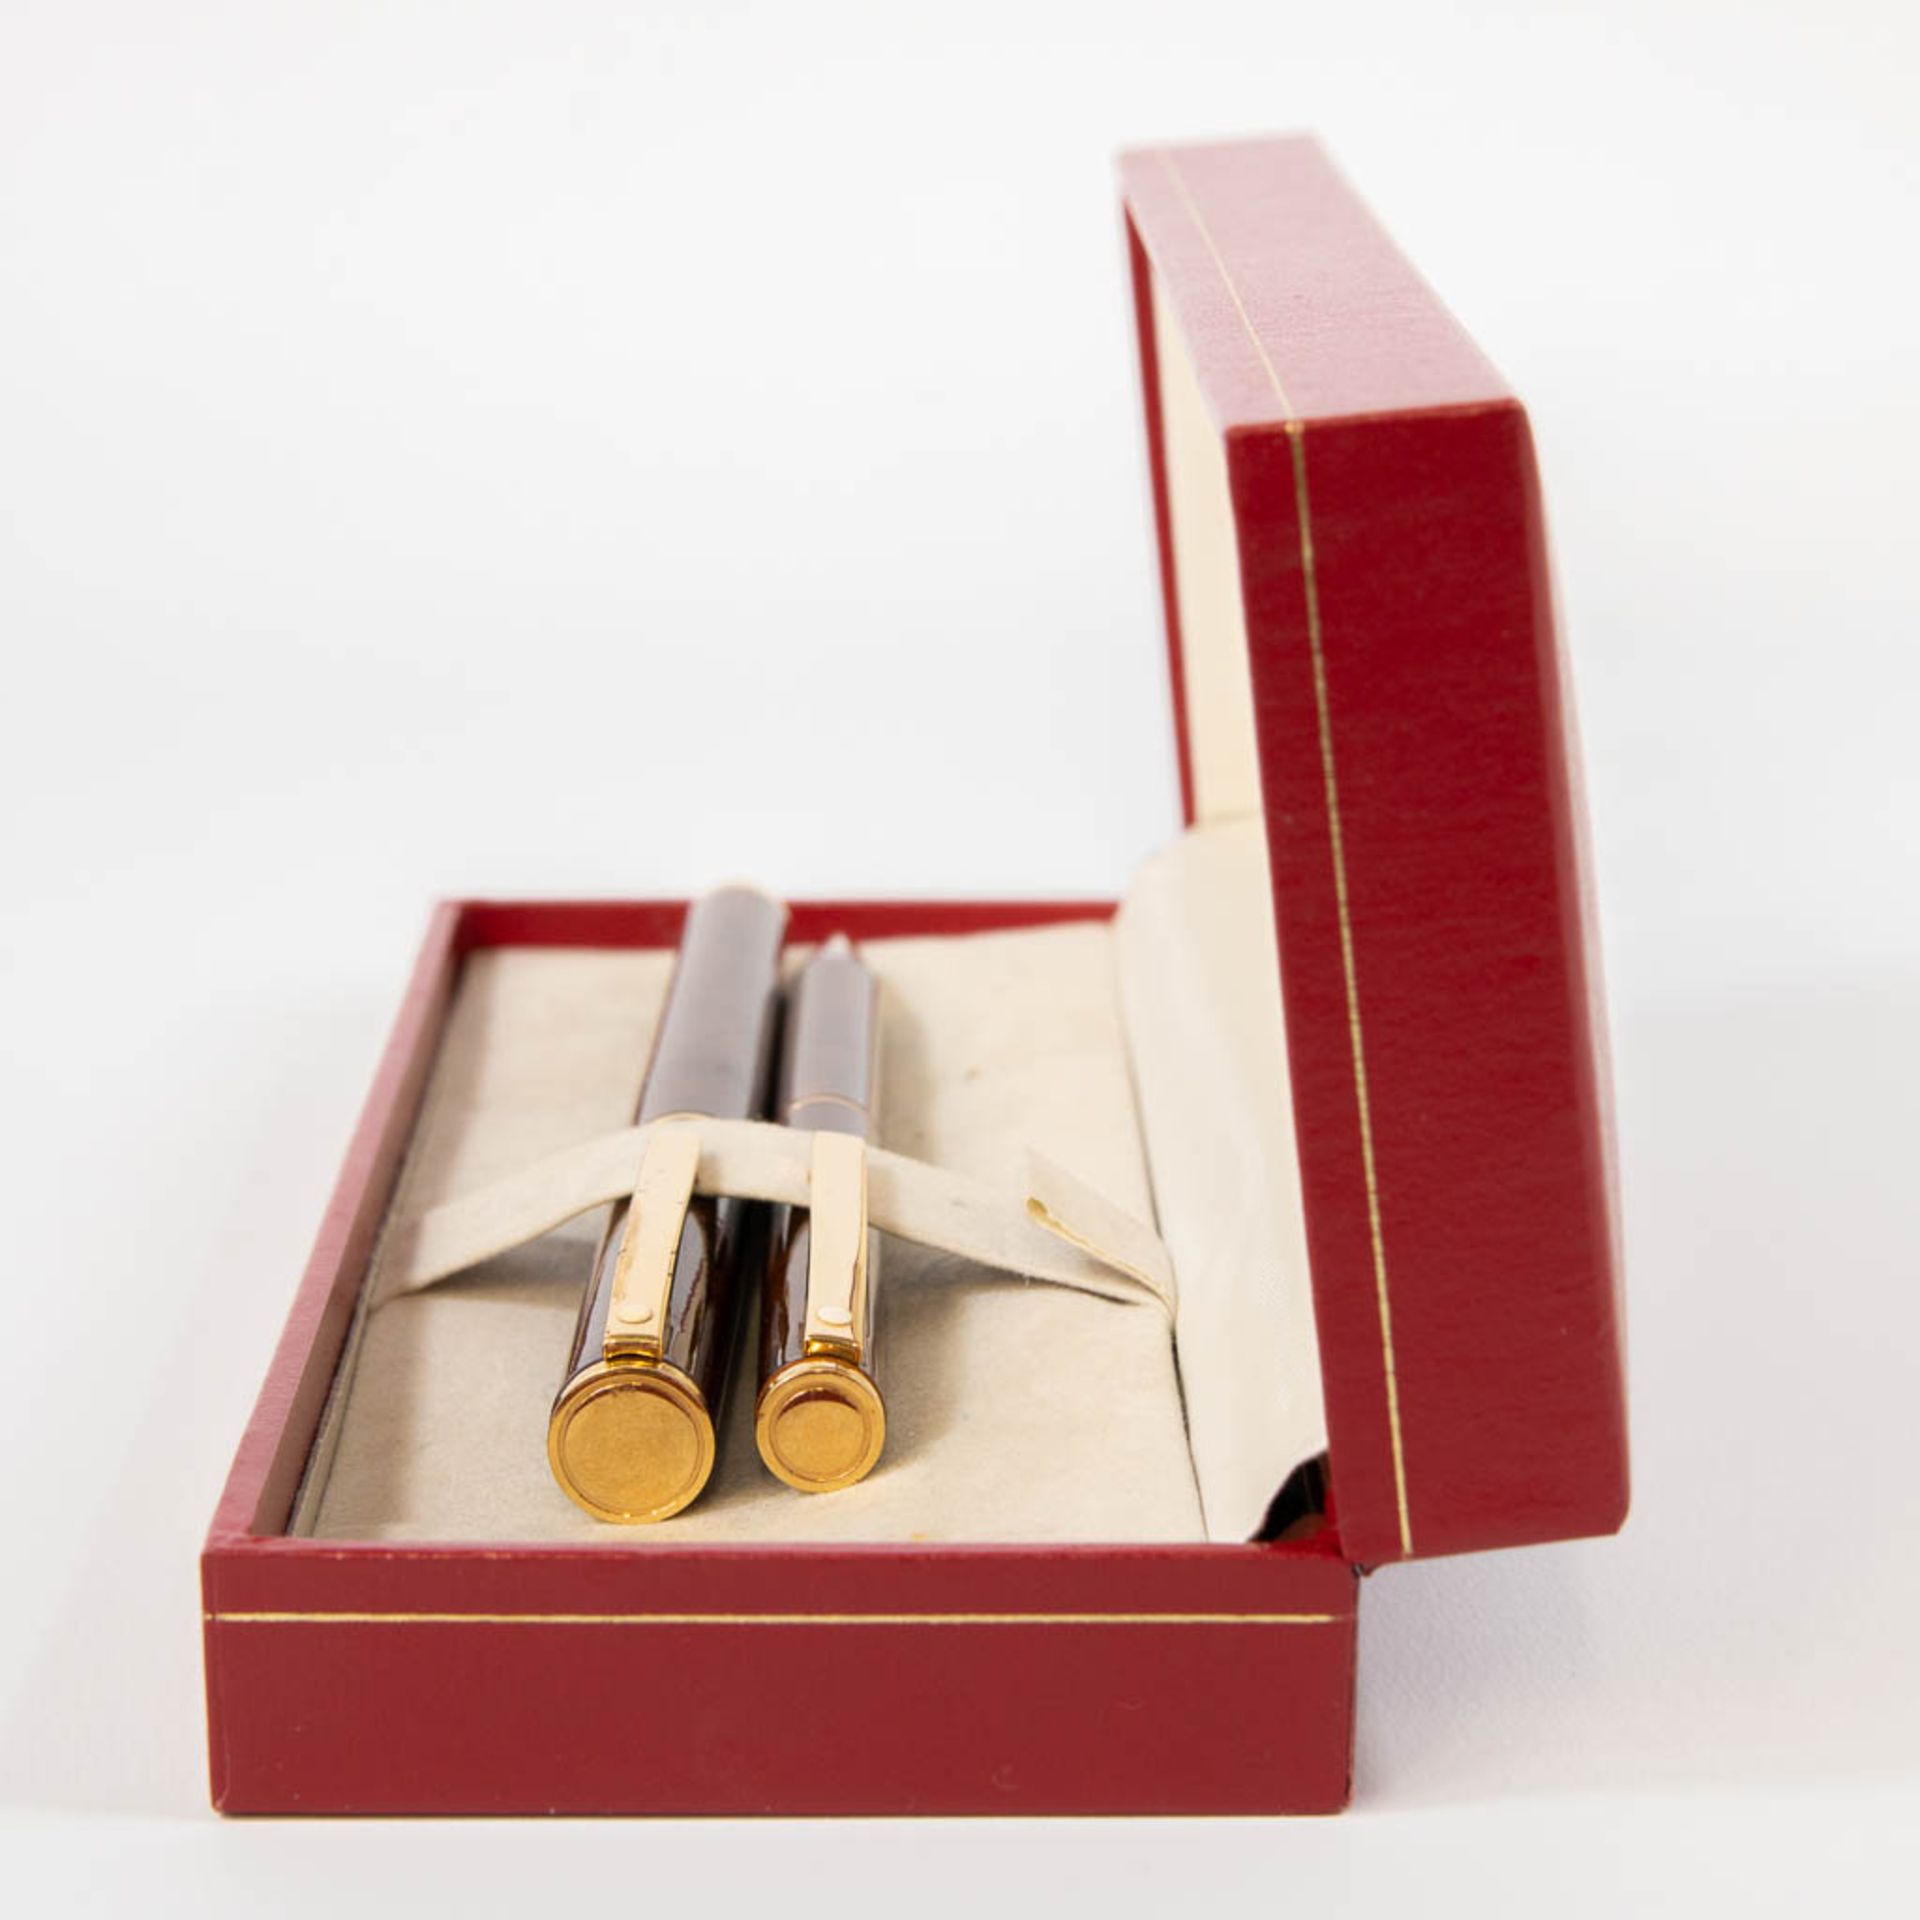 A Sheaffer fountain pen with 18kg gold nib, and a ballpoint pen in their original case. - Image 7 of 11